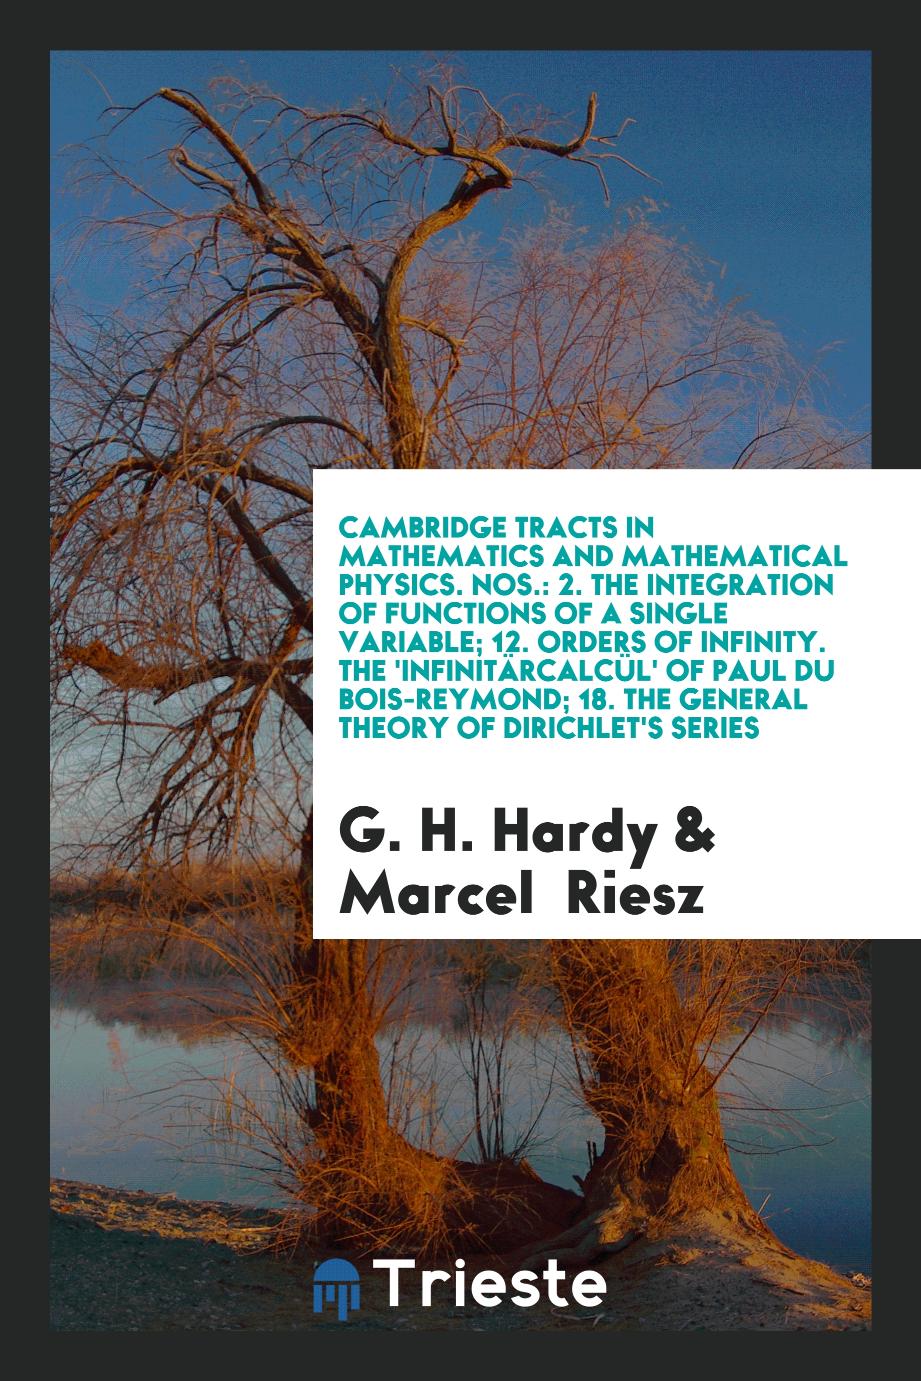 Cambridge Tracts in Mathematics and Mathematical Physics. Nos.: 2. The Integration of Functions of a Single Variable; 12. Orders of Infinity. The 'Infinitärcalcül' of Paul Du Bois-Reymond; 18. The General Theory of Dirichlet's Series